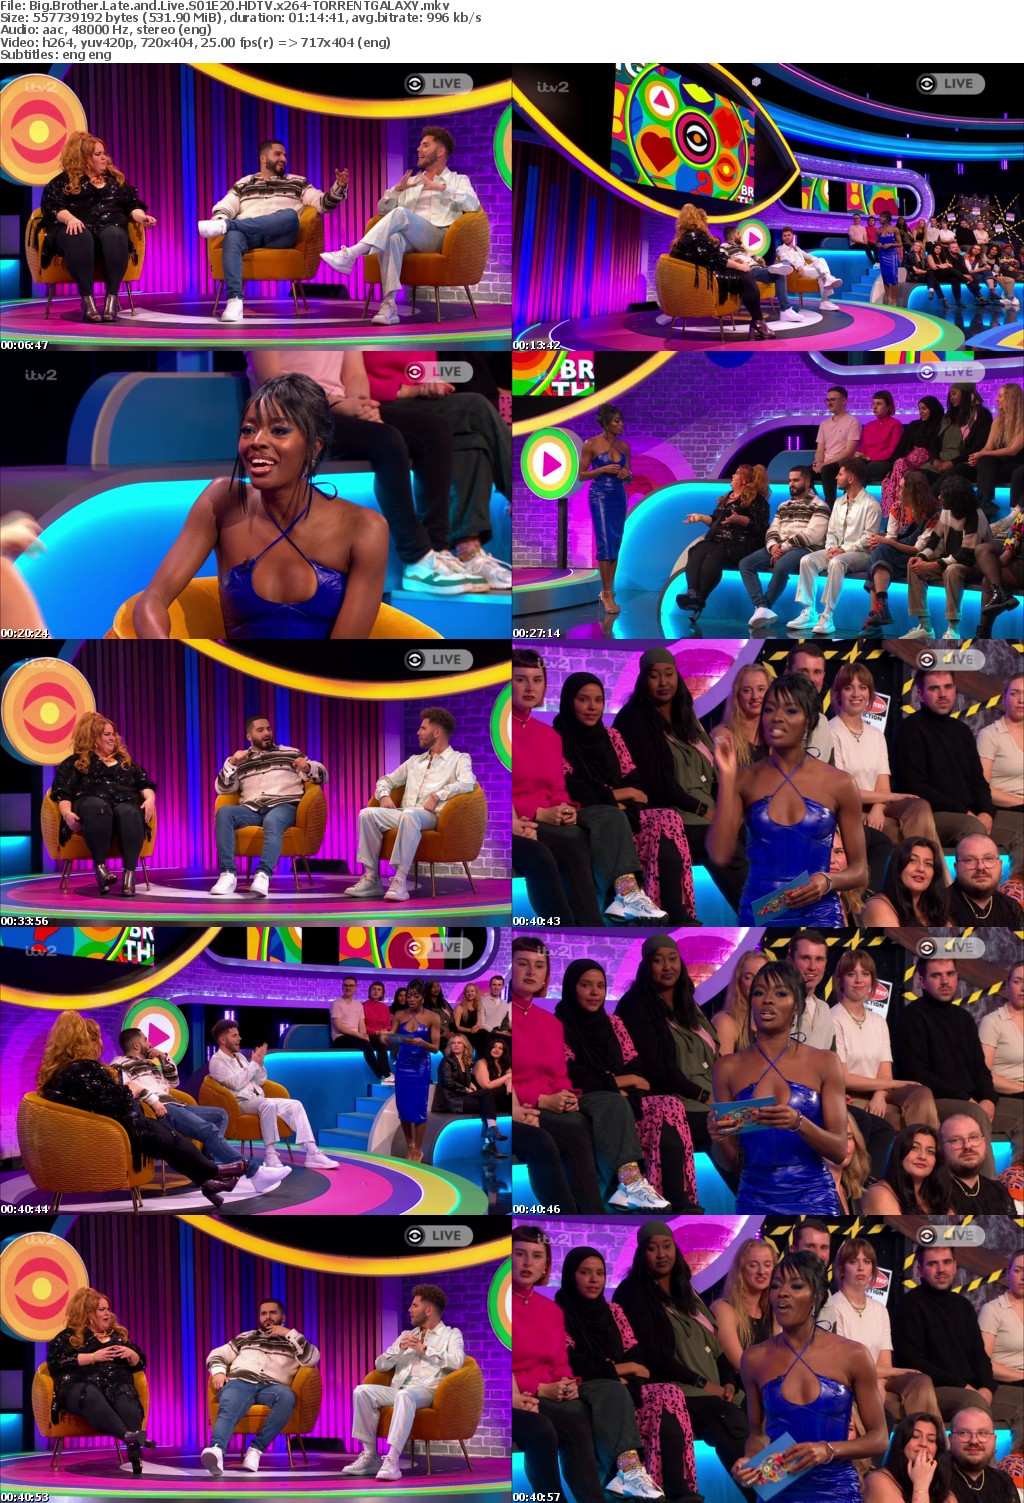 Big Brother Late and Live S01E20 HDTV x264-GALAXY